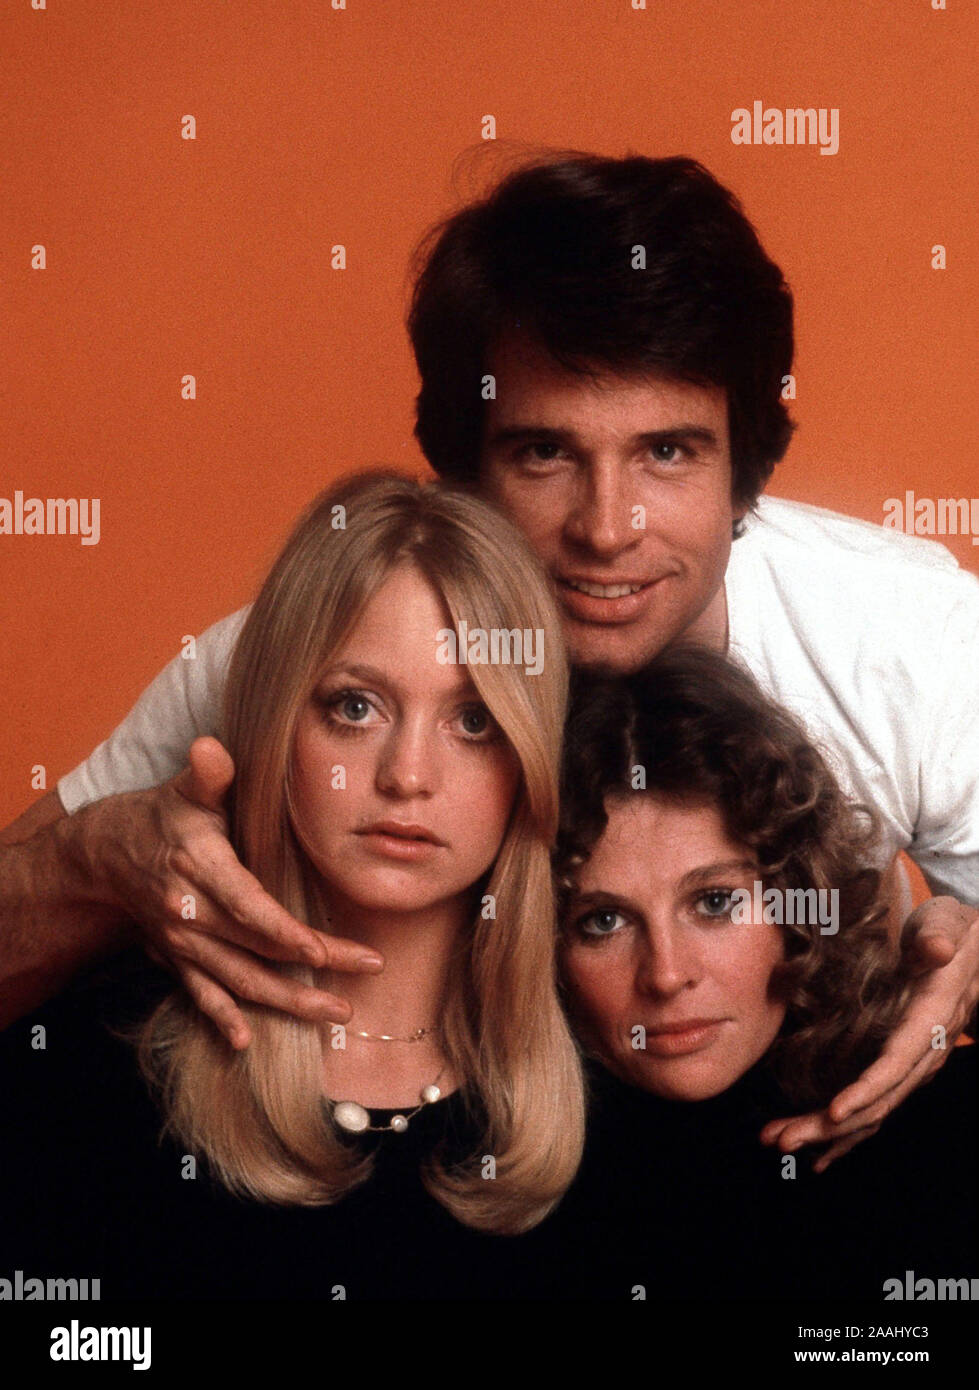 WARREN BEATTY, JULIE CHRISTIE and GOLDIE HAWN in SHAMPOO (1975), directed by HAL ASHBY. Credit: COLUMBIA PICTURES / Album Stock Photo